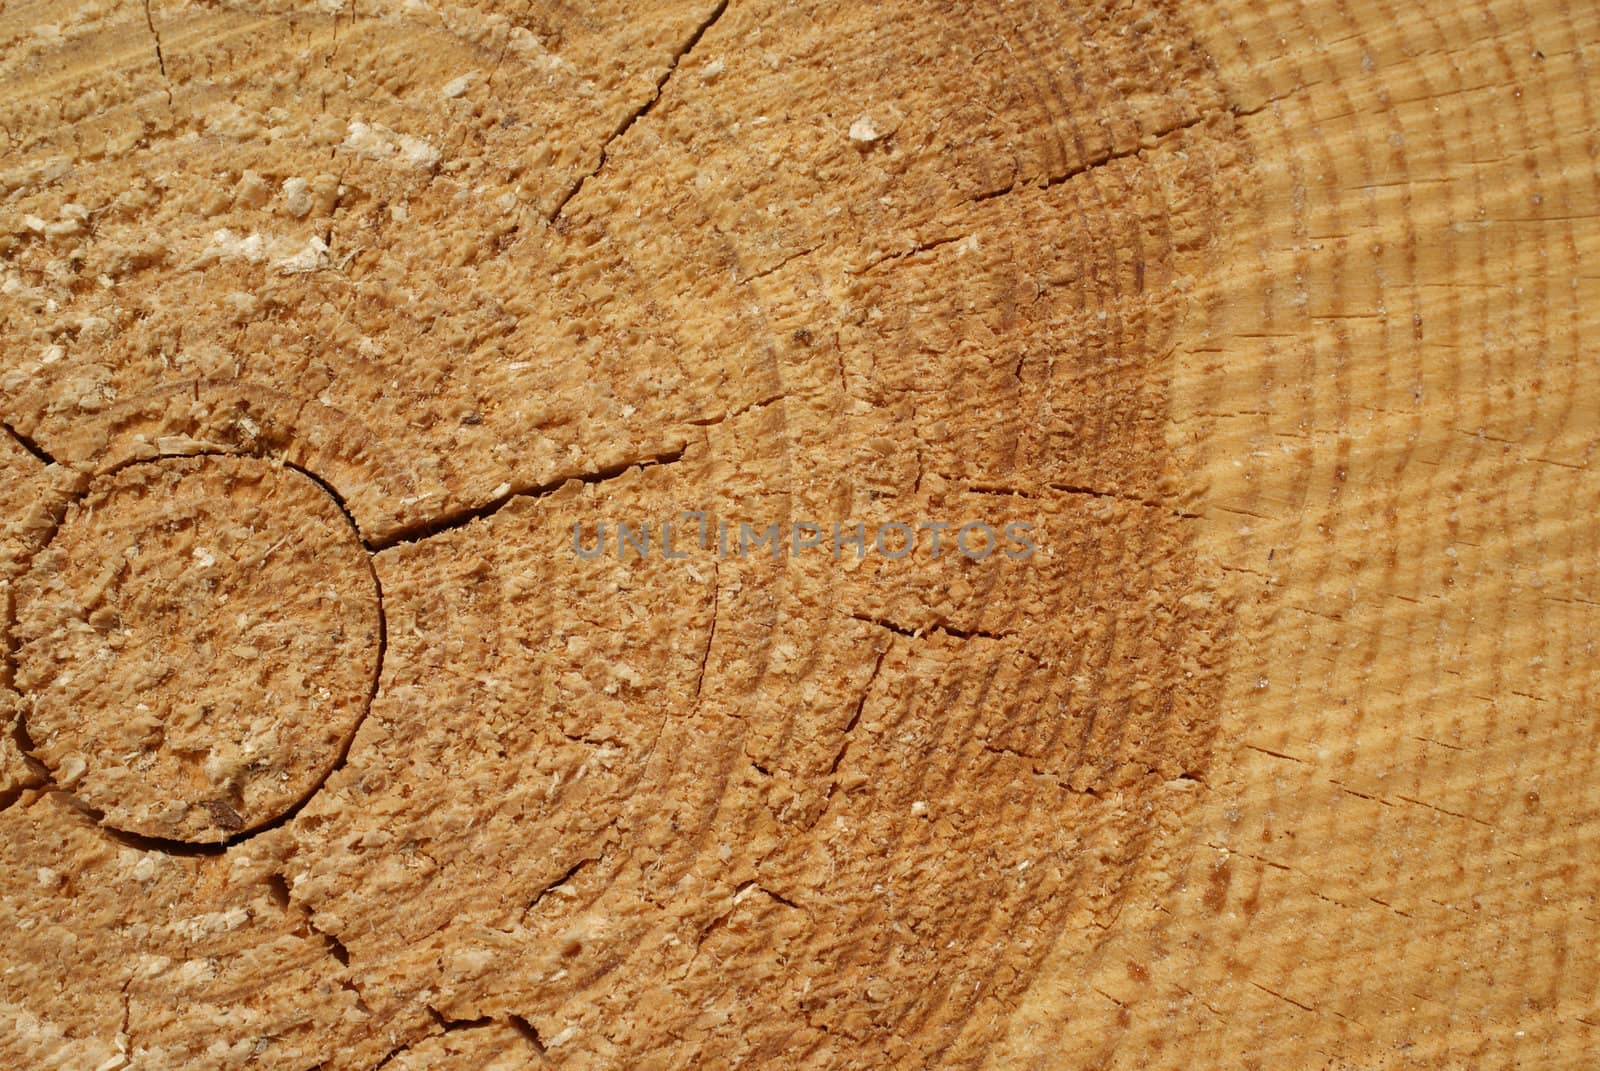 End of a pine log showing the annual growth ring pattern. Small drops of resin are visible. Photographed in Muurla, Finland in April 2010.